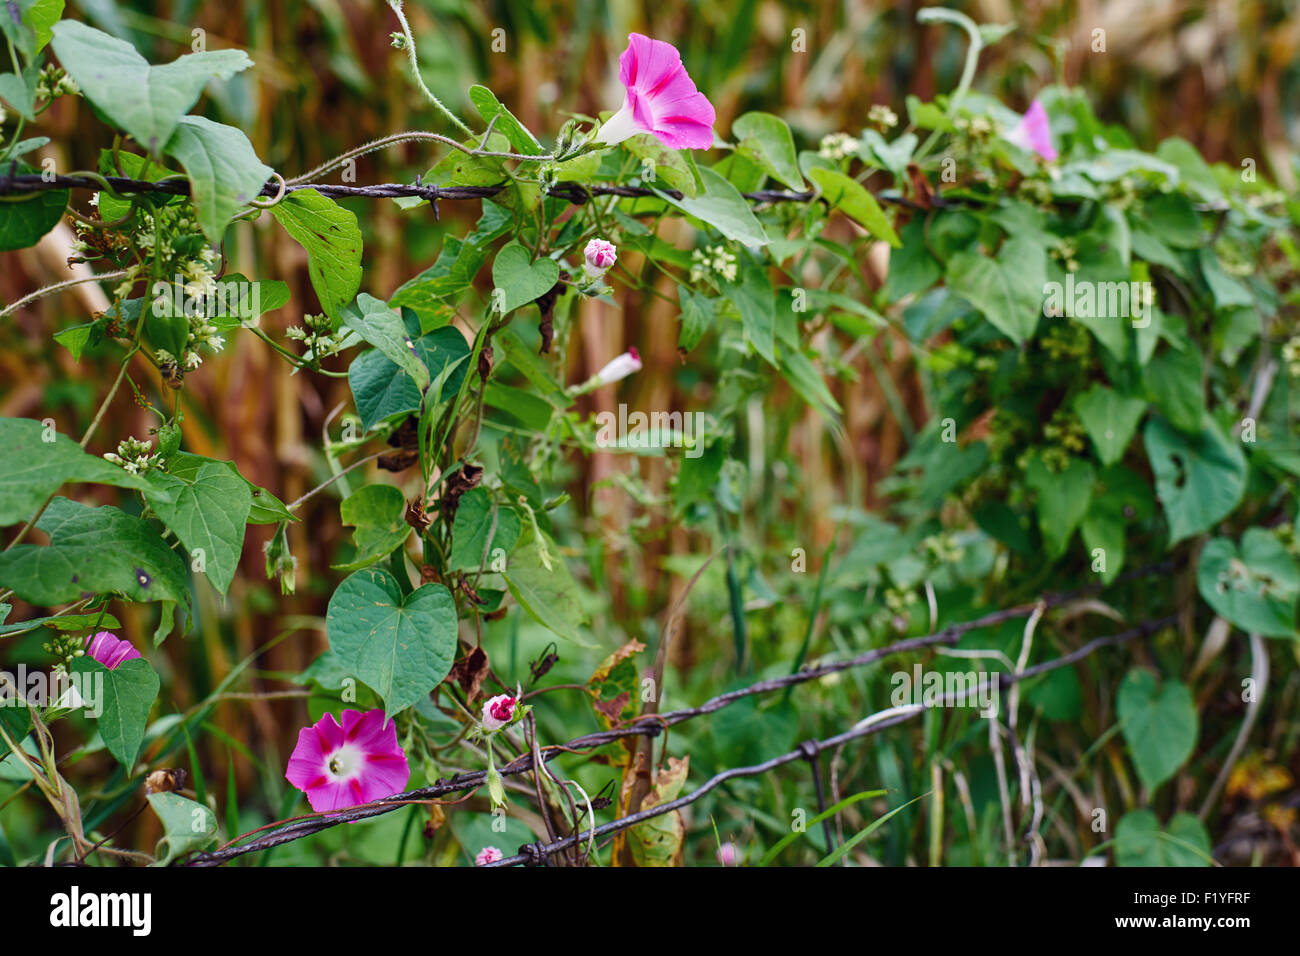 Morning glory blooms grow on a wired fence. Stock Photo